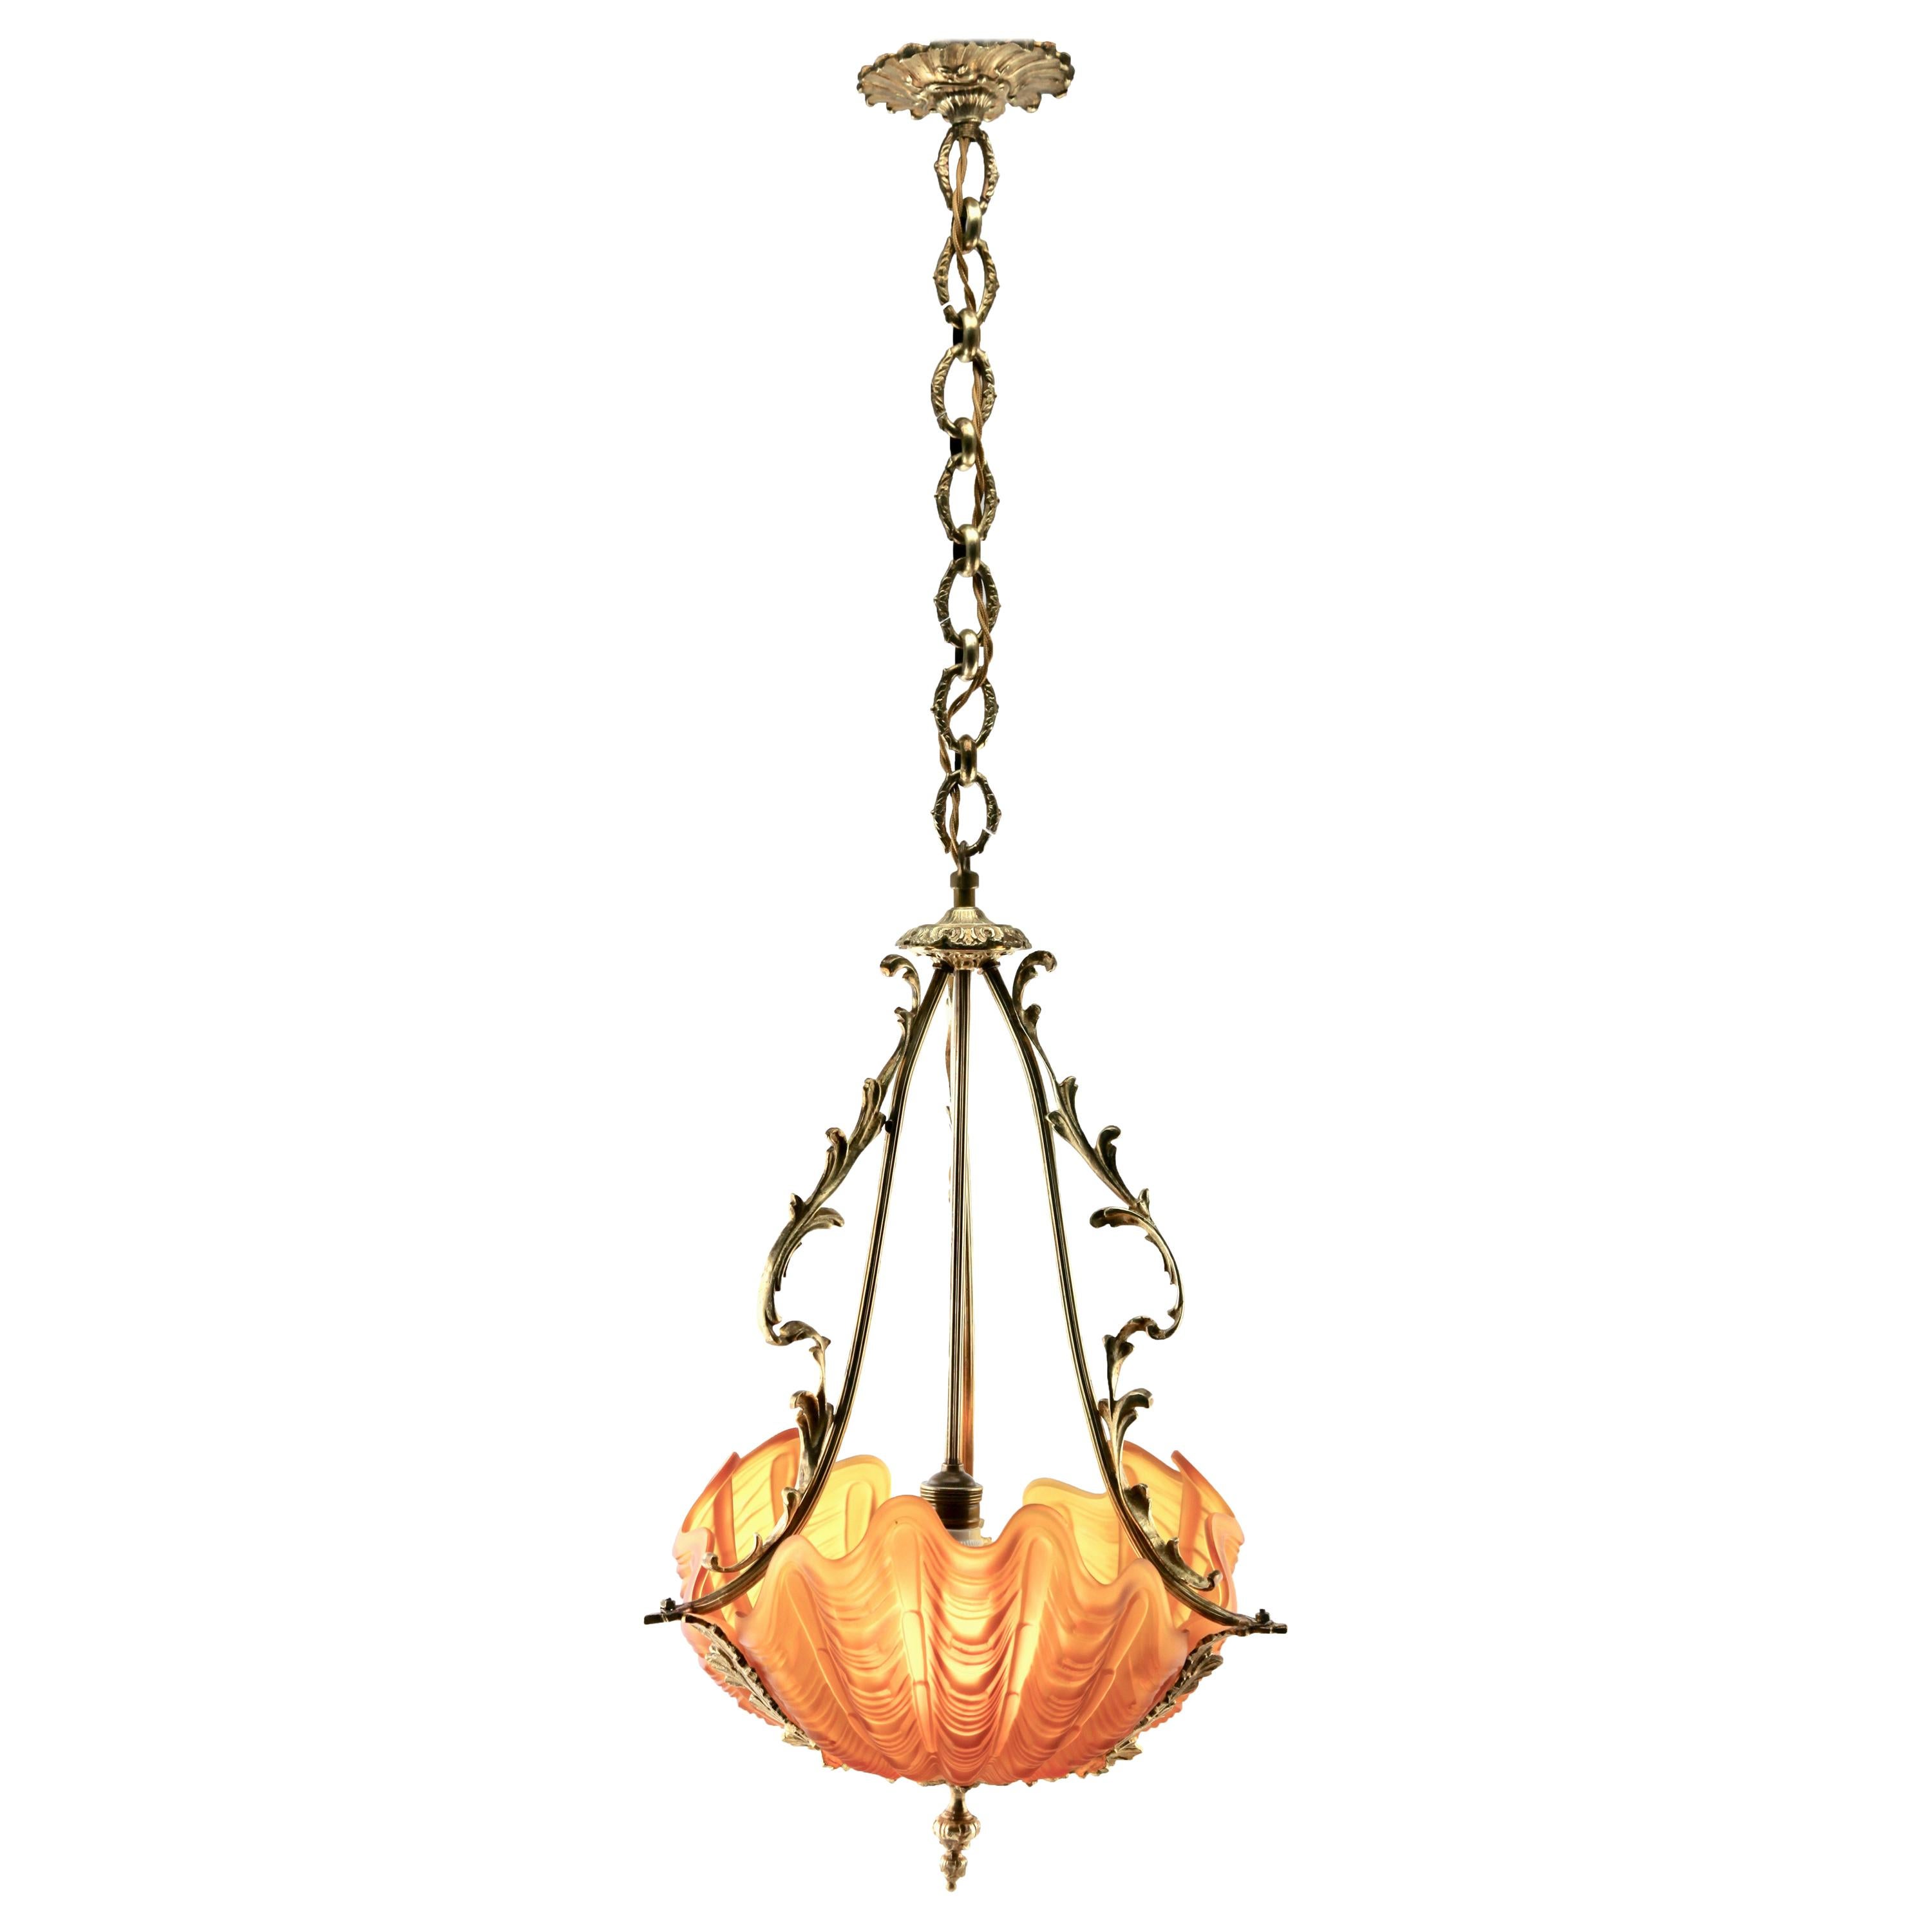 Art Nouveau Central Pendant Lamp Whit Three Clam Shells and Framework of Brass